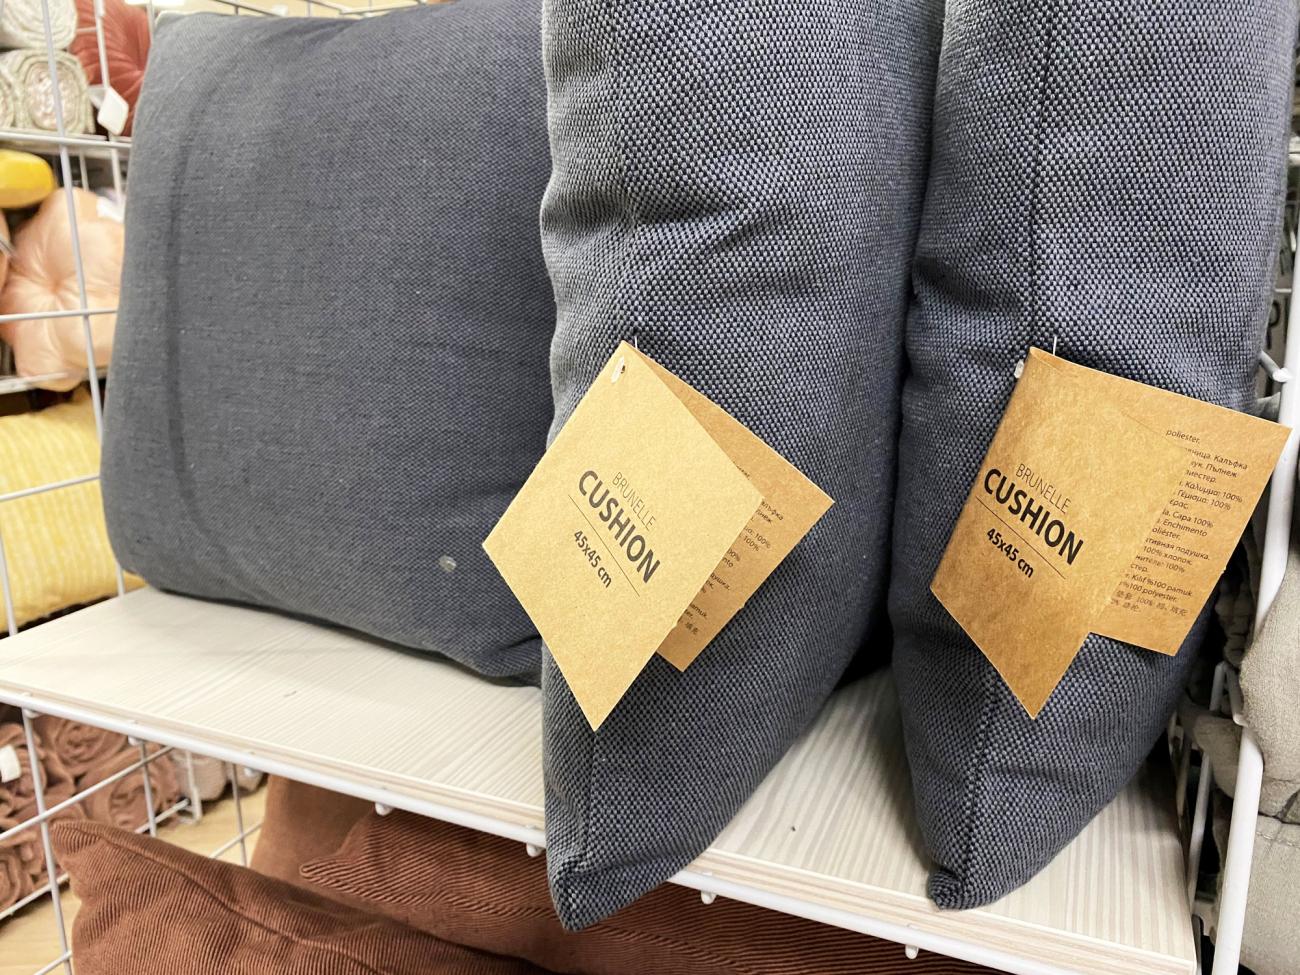 Pillows will get a simple and more sustainable name tag with information for the customers.